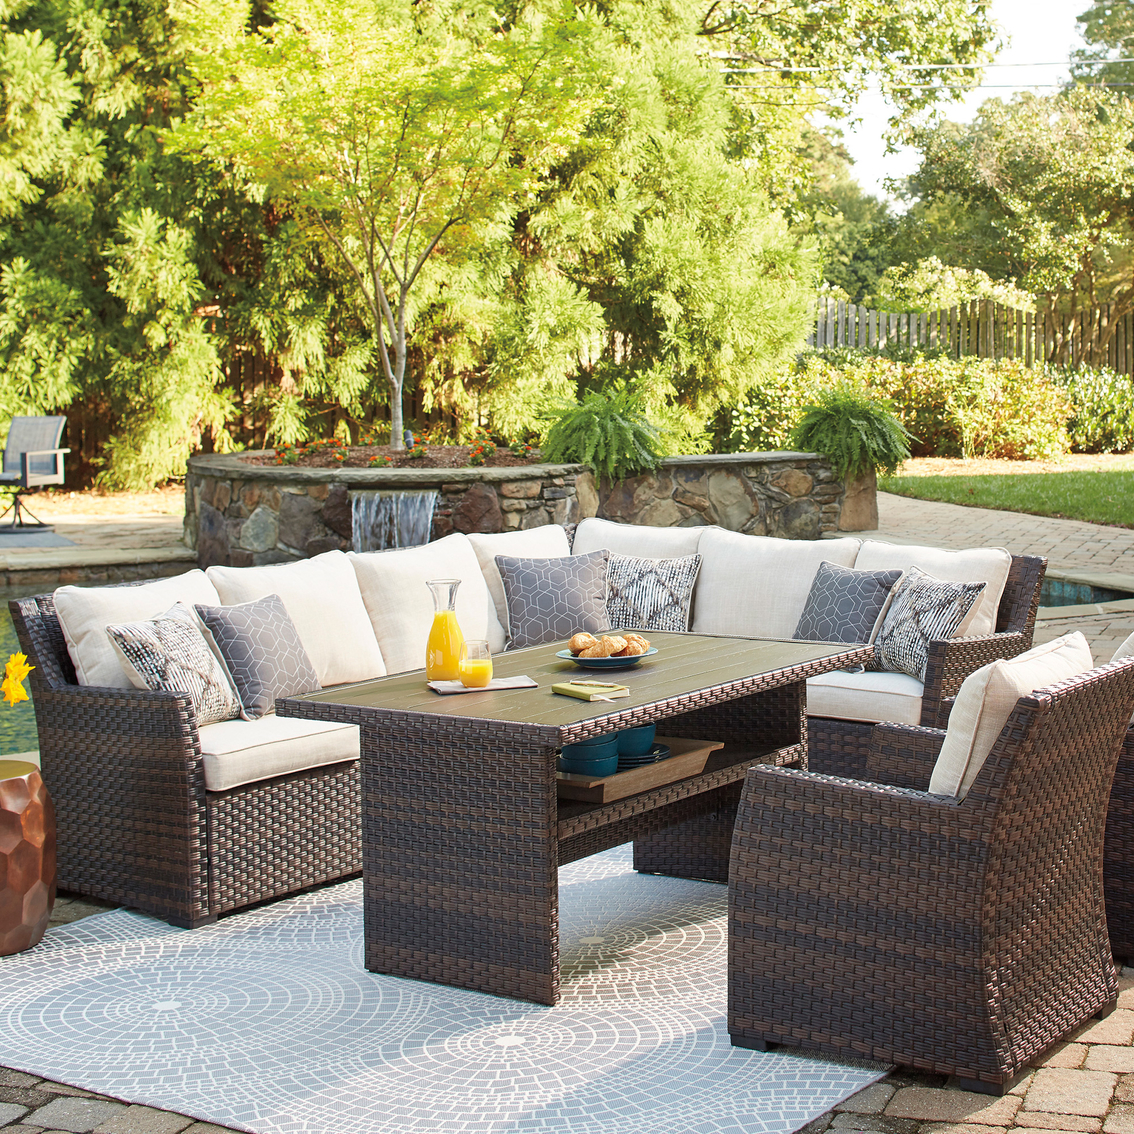 Signature Design by Ashley Easy Isle Outdoor Sofa Sectional with 2 Chairs and Table - Image 3 of 4